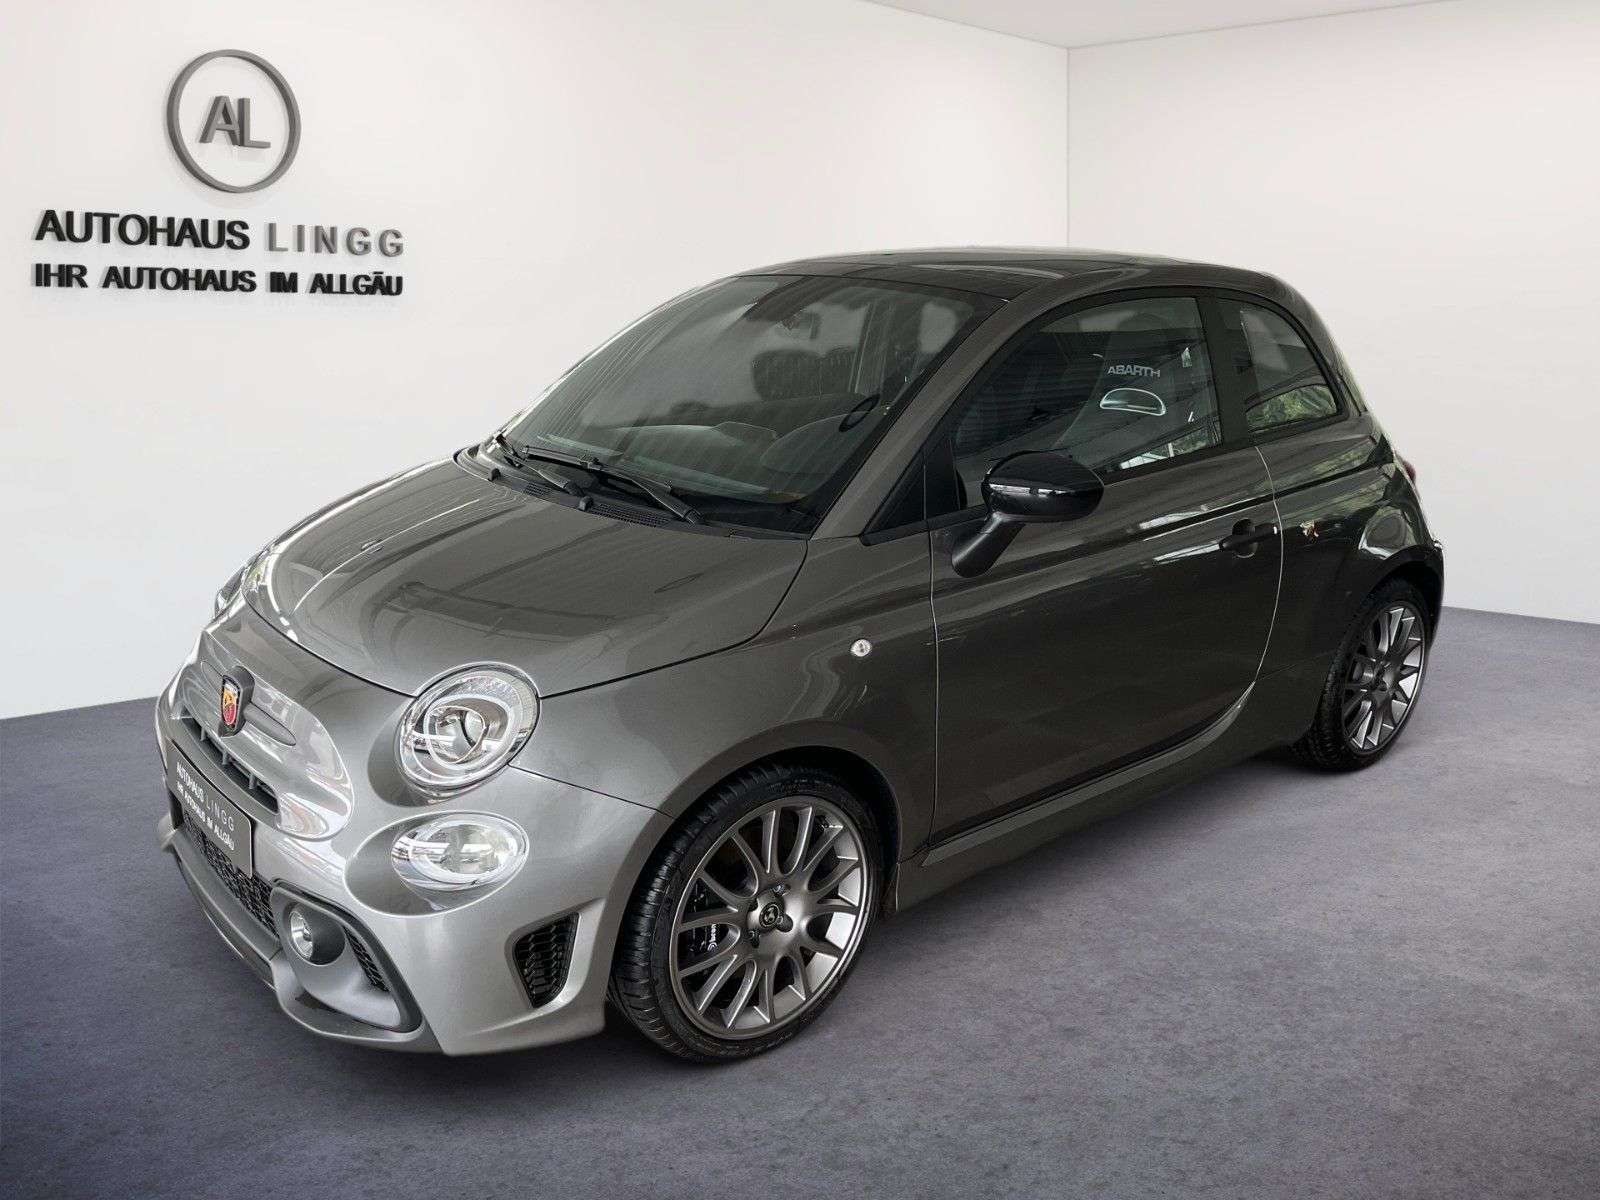 Abarth 695 Compact in Grey pre-registered in Lindenberg for € 32,900.-